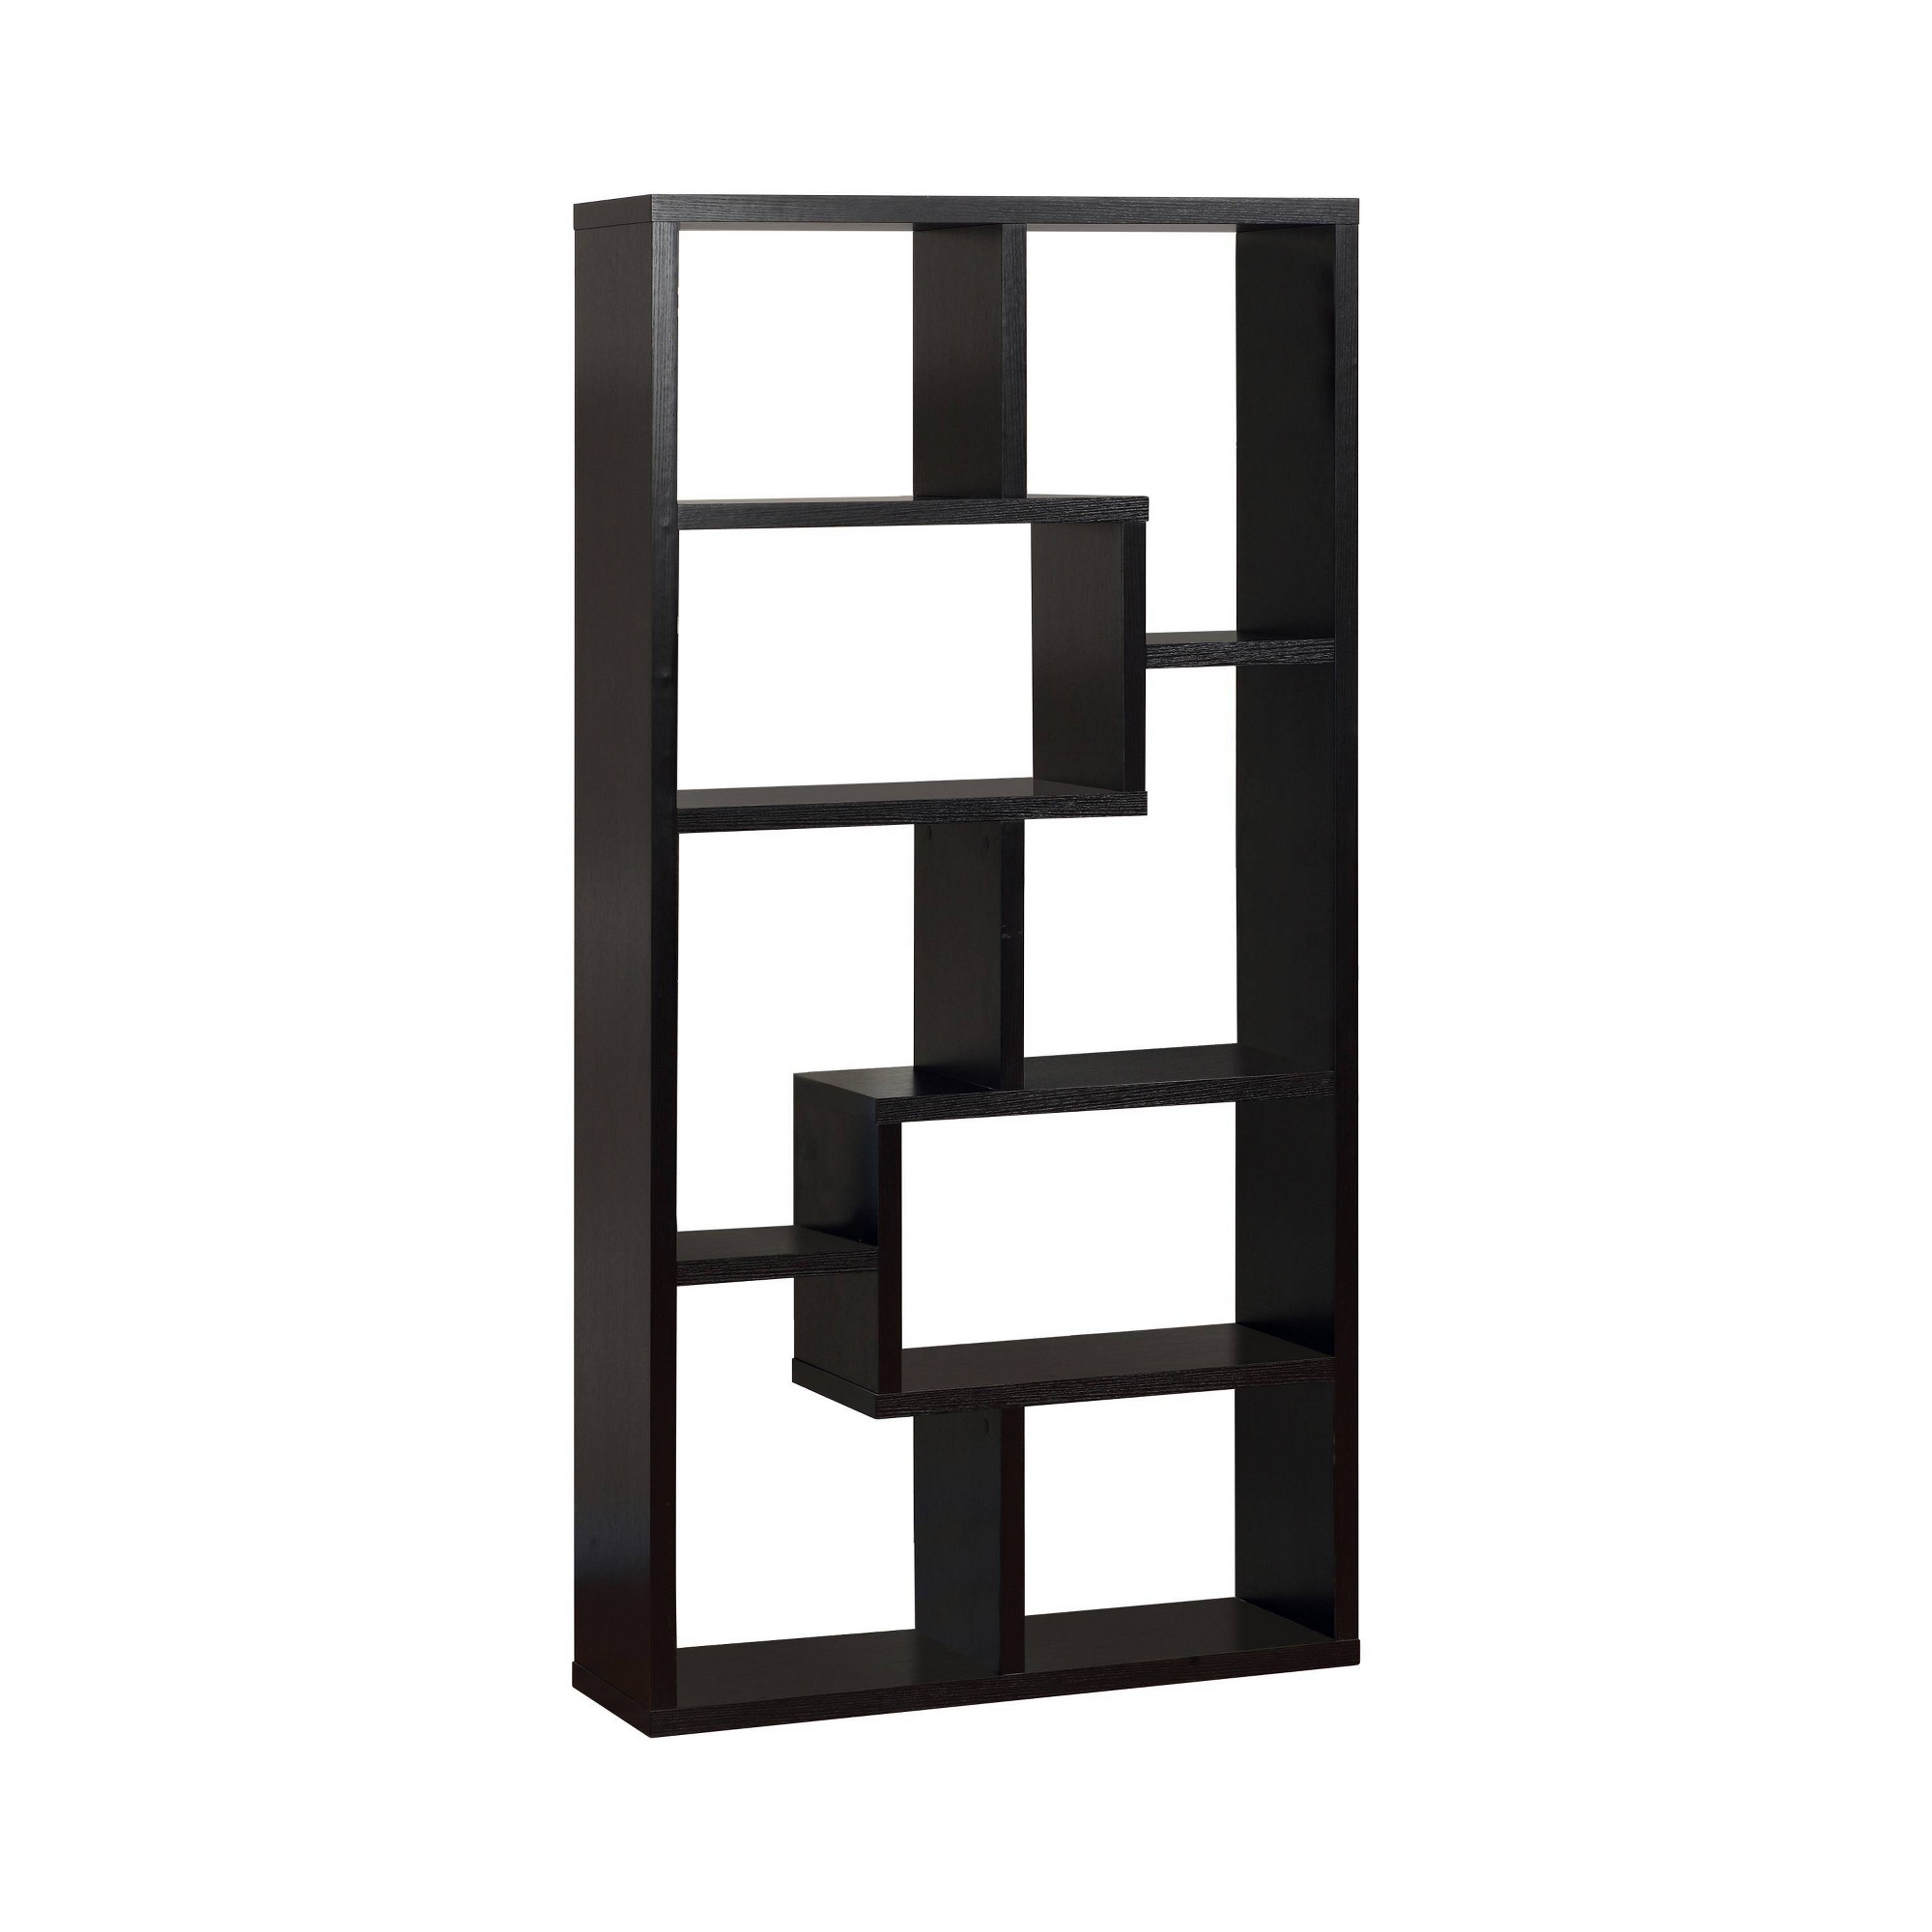 '71'' Highpoint Contoured Bookcase Black - ioHOMES'